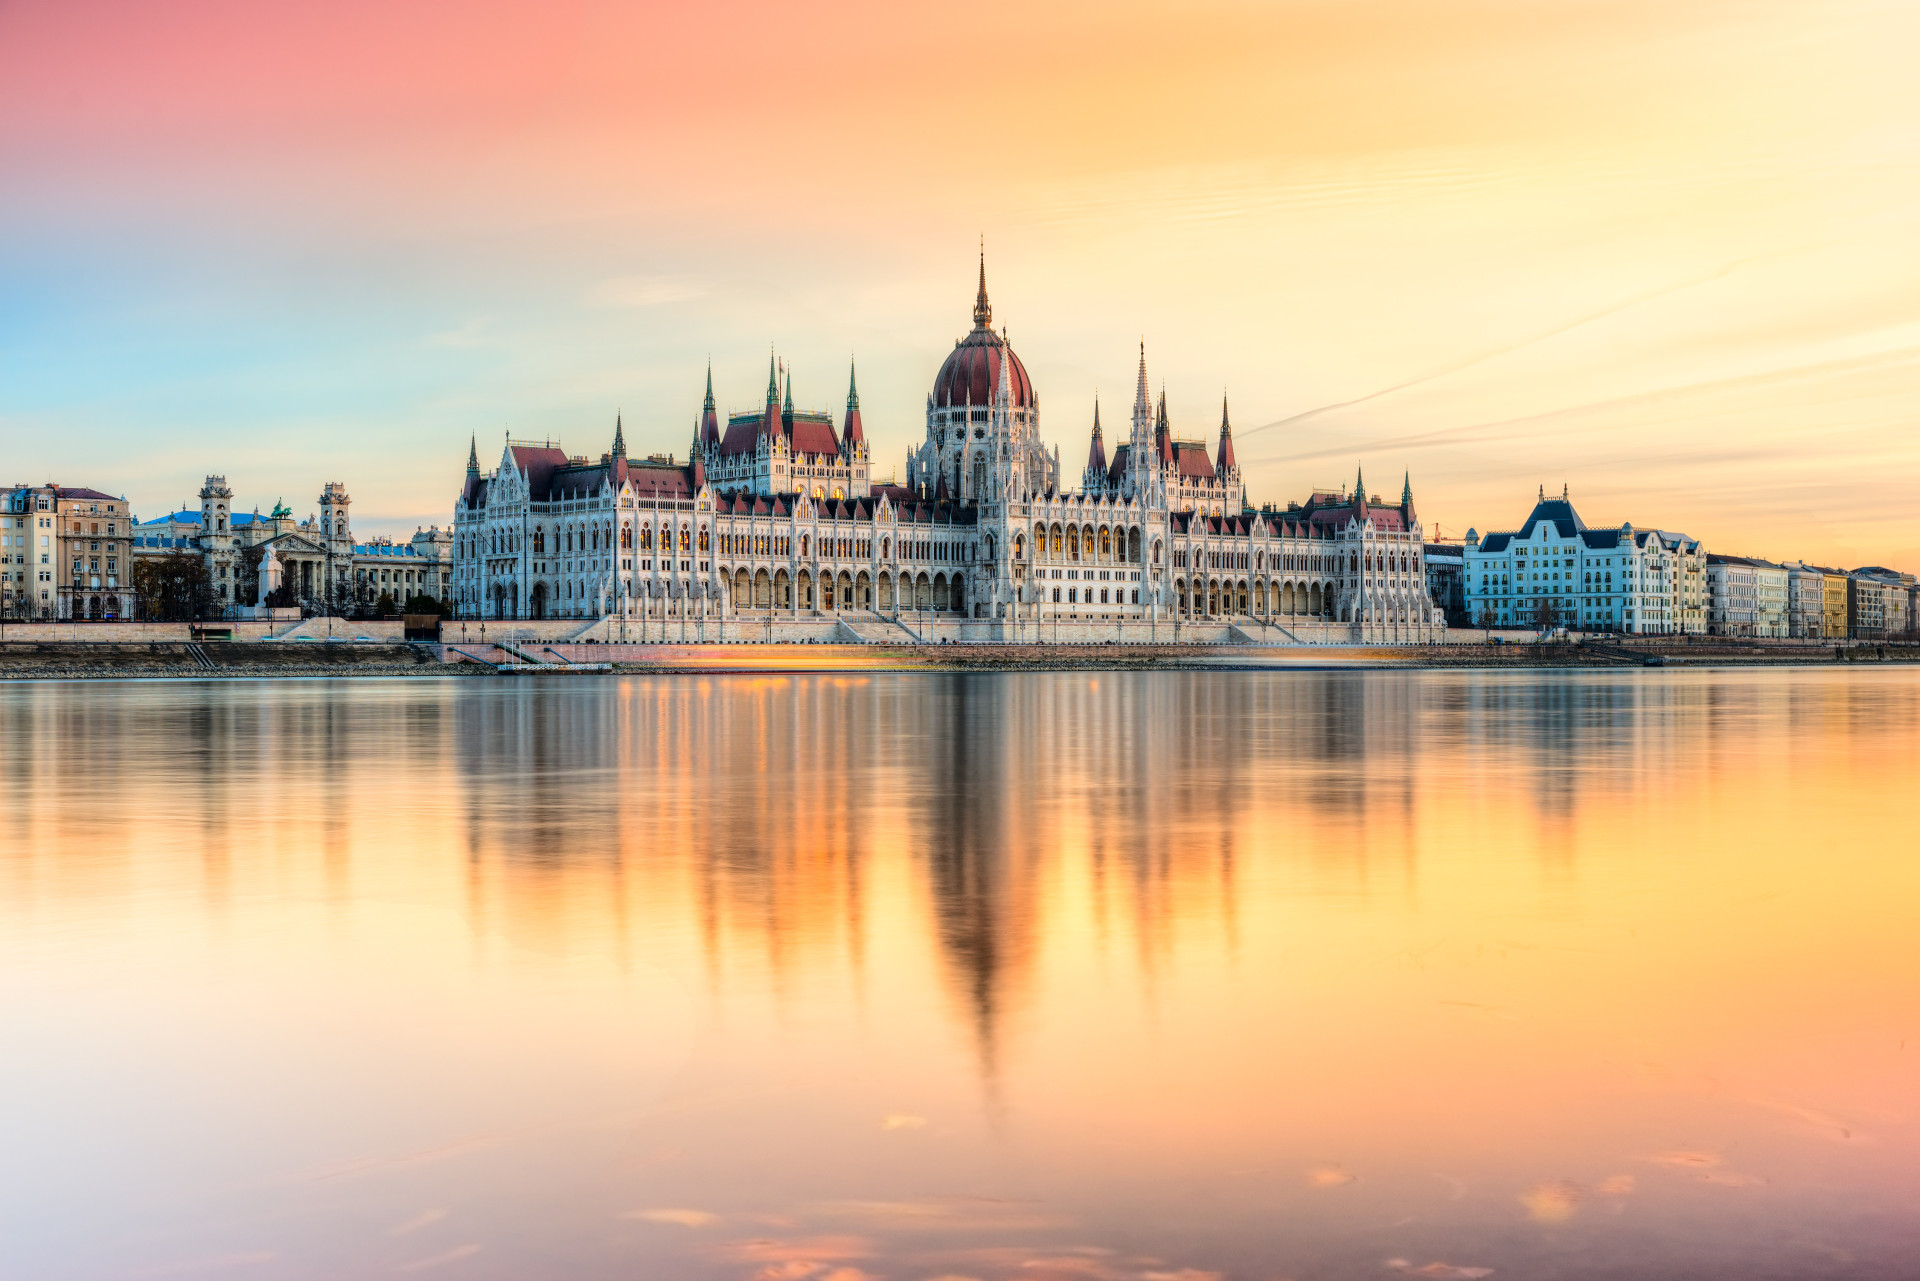 The city of Budapest is divided into Buda and Pest, with the Danube river running between them. The beautiful Hungarian capital is a great destination for <a href="https://uk.starsinsider.com/travel/222457/incredible-european-destinations-that-are-surprisingly-cheap">budget </a>travelers.